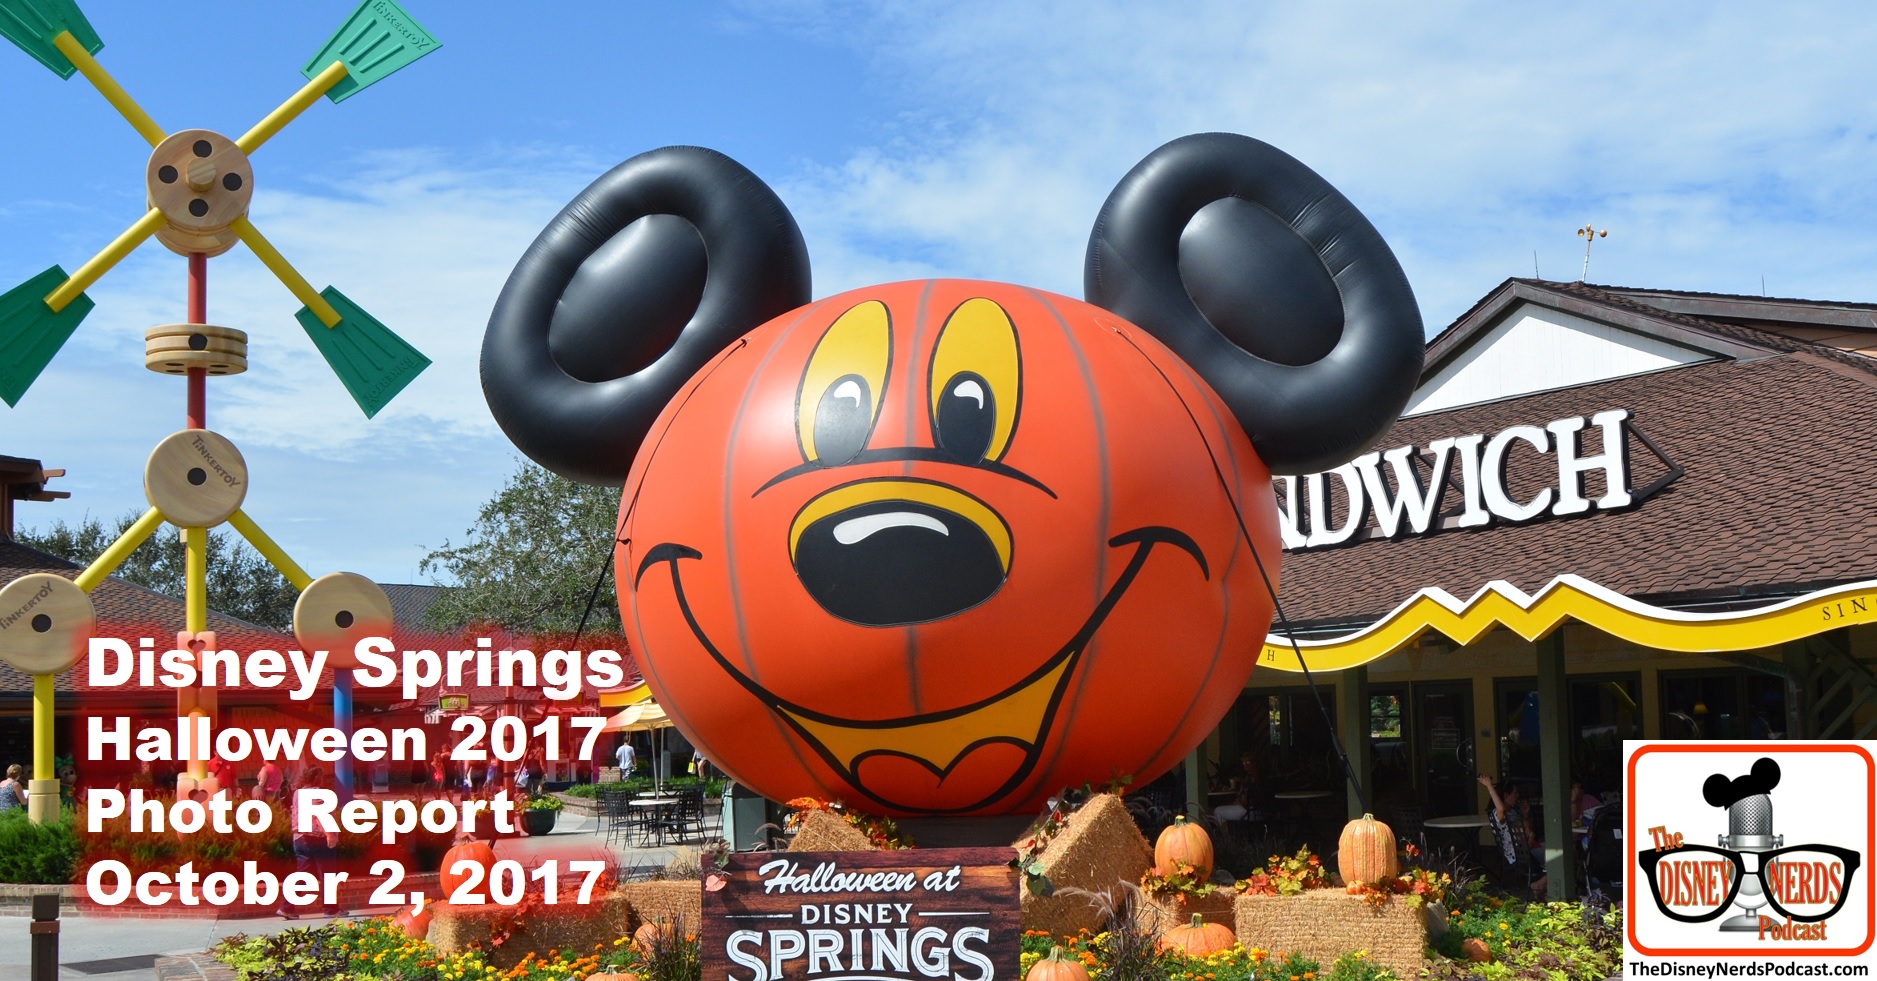 The Disney Nerds Podcast - Halloween at Disney Springs Photo Report - October 2, 2017